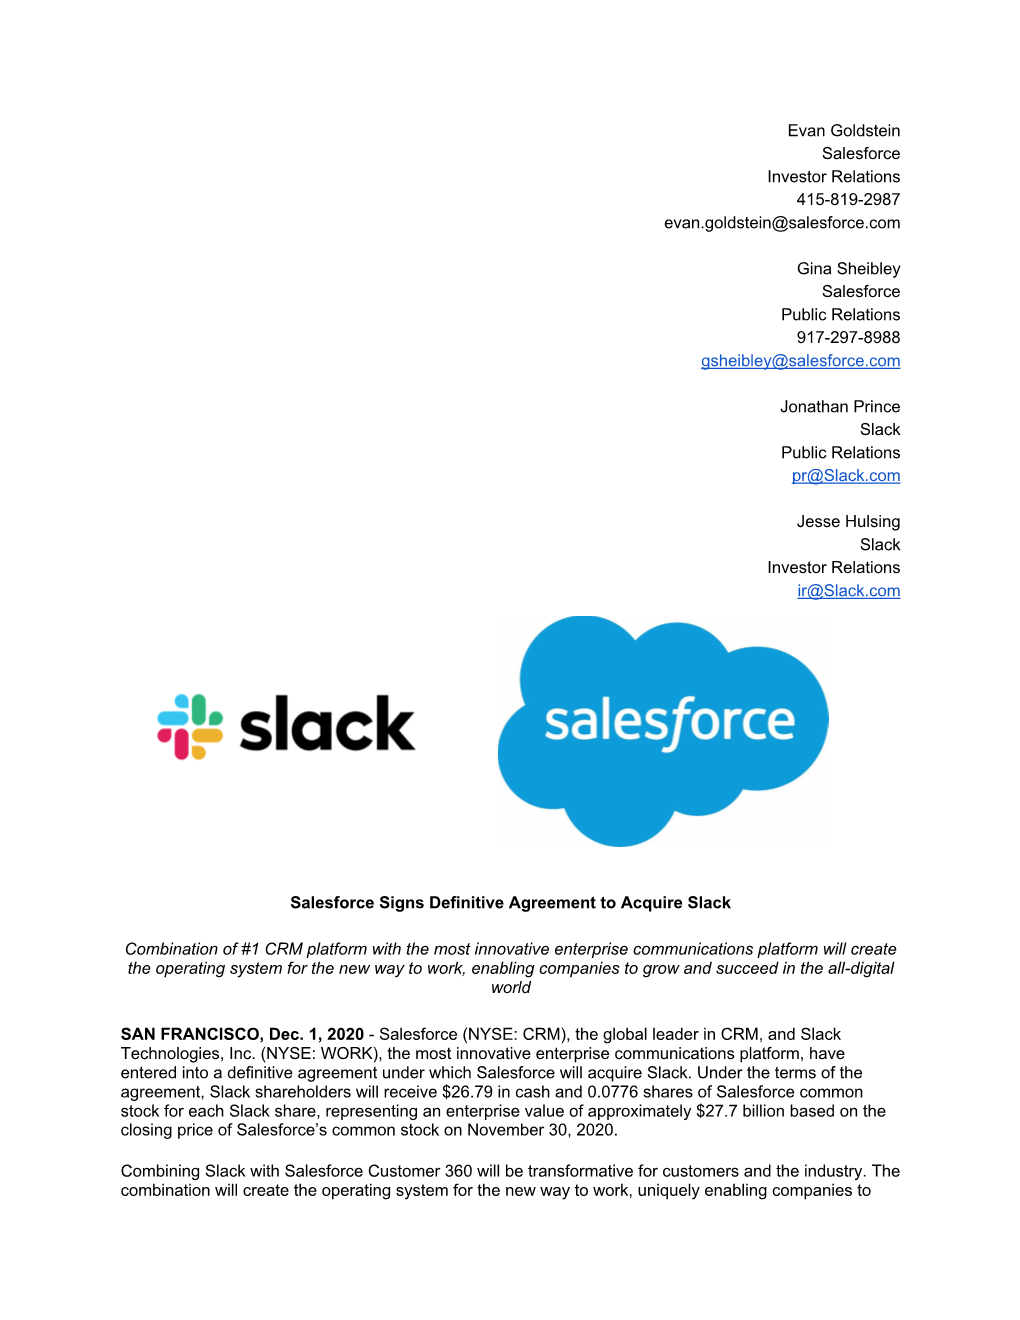 Q3 FY21 Salesforce Signs Definitive Agreement to Acquire Slack FINAL